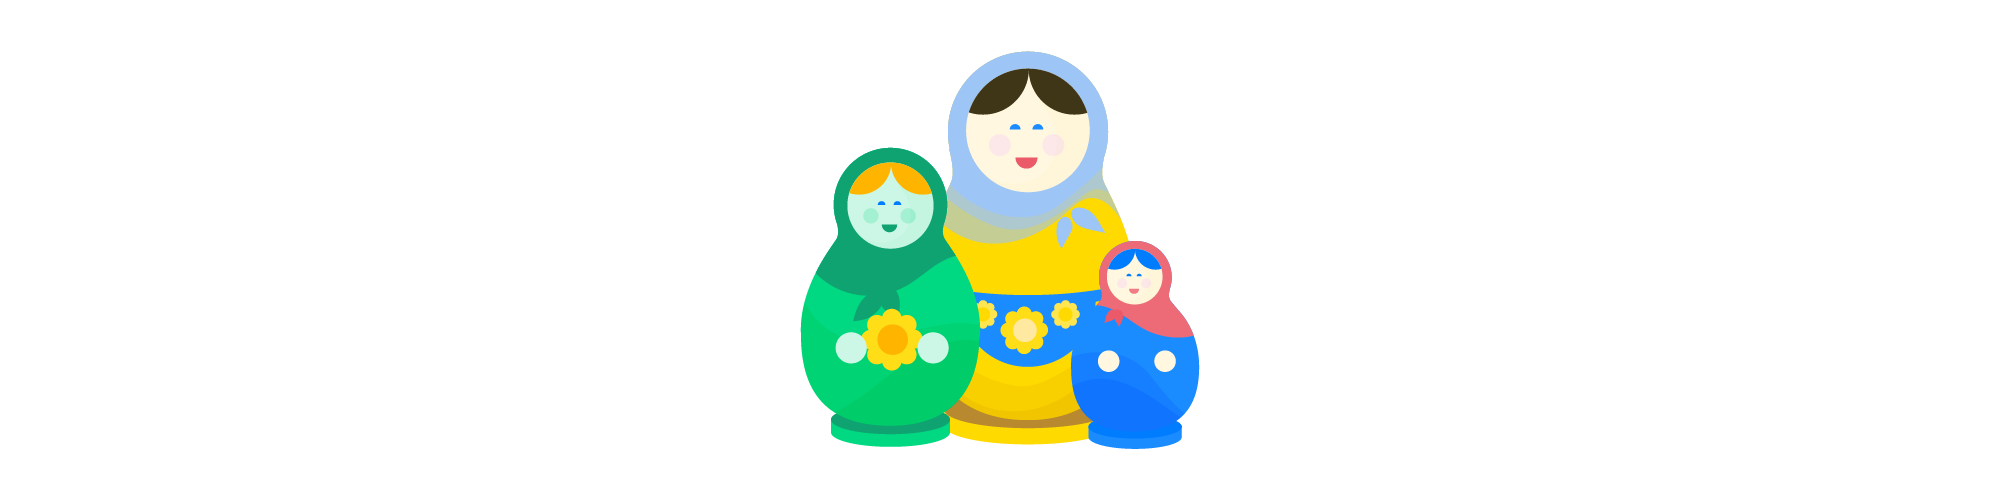 Colorful Russian dolls